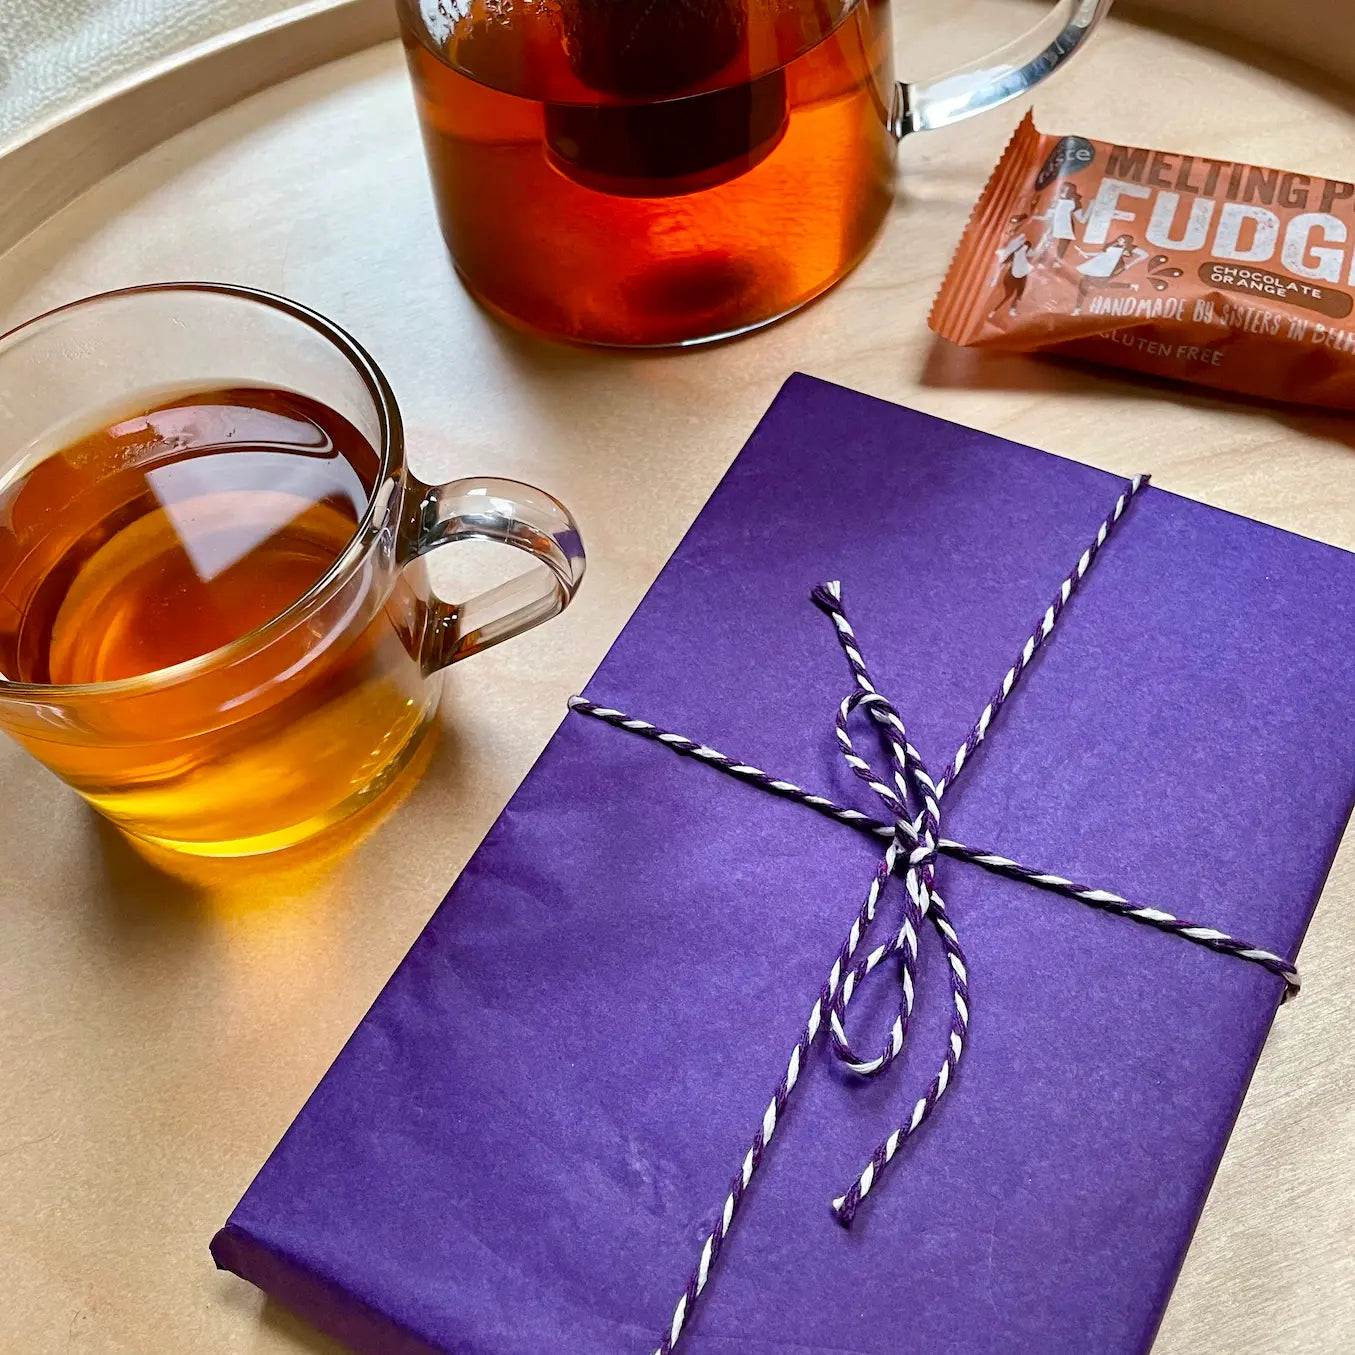 The image shown is of a beautifully wrapped new book, on a tray, beside which sits a chunky bar of Belfast-made fudge and a mug of tea.